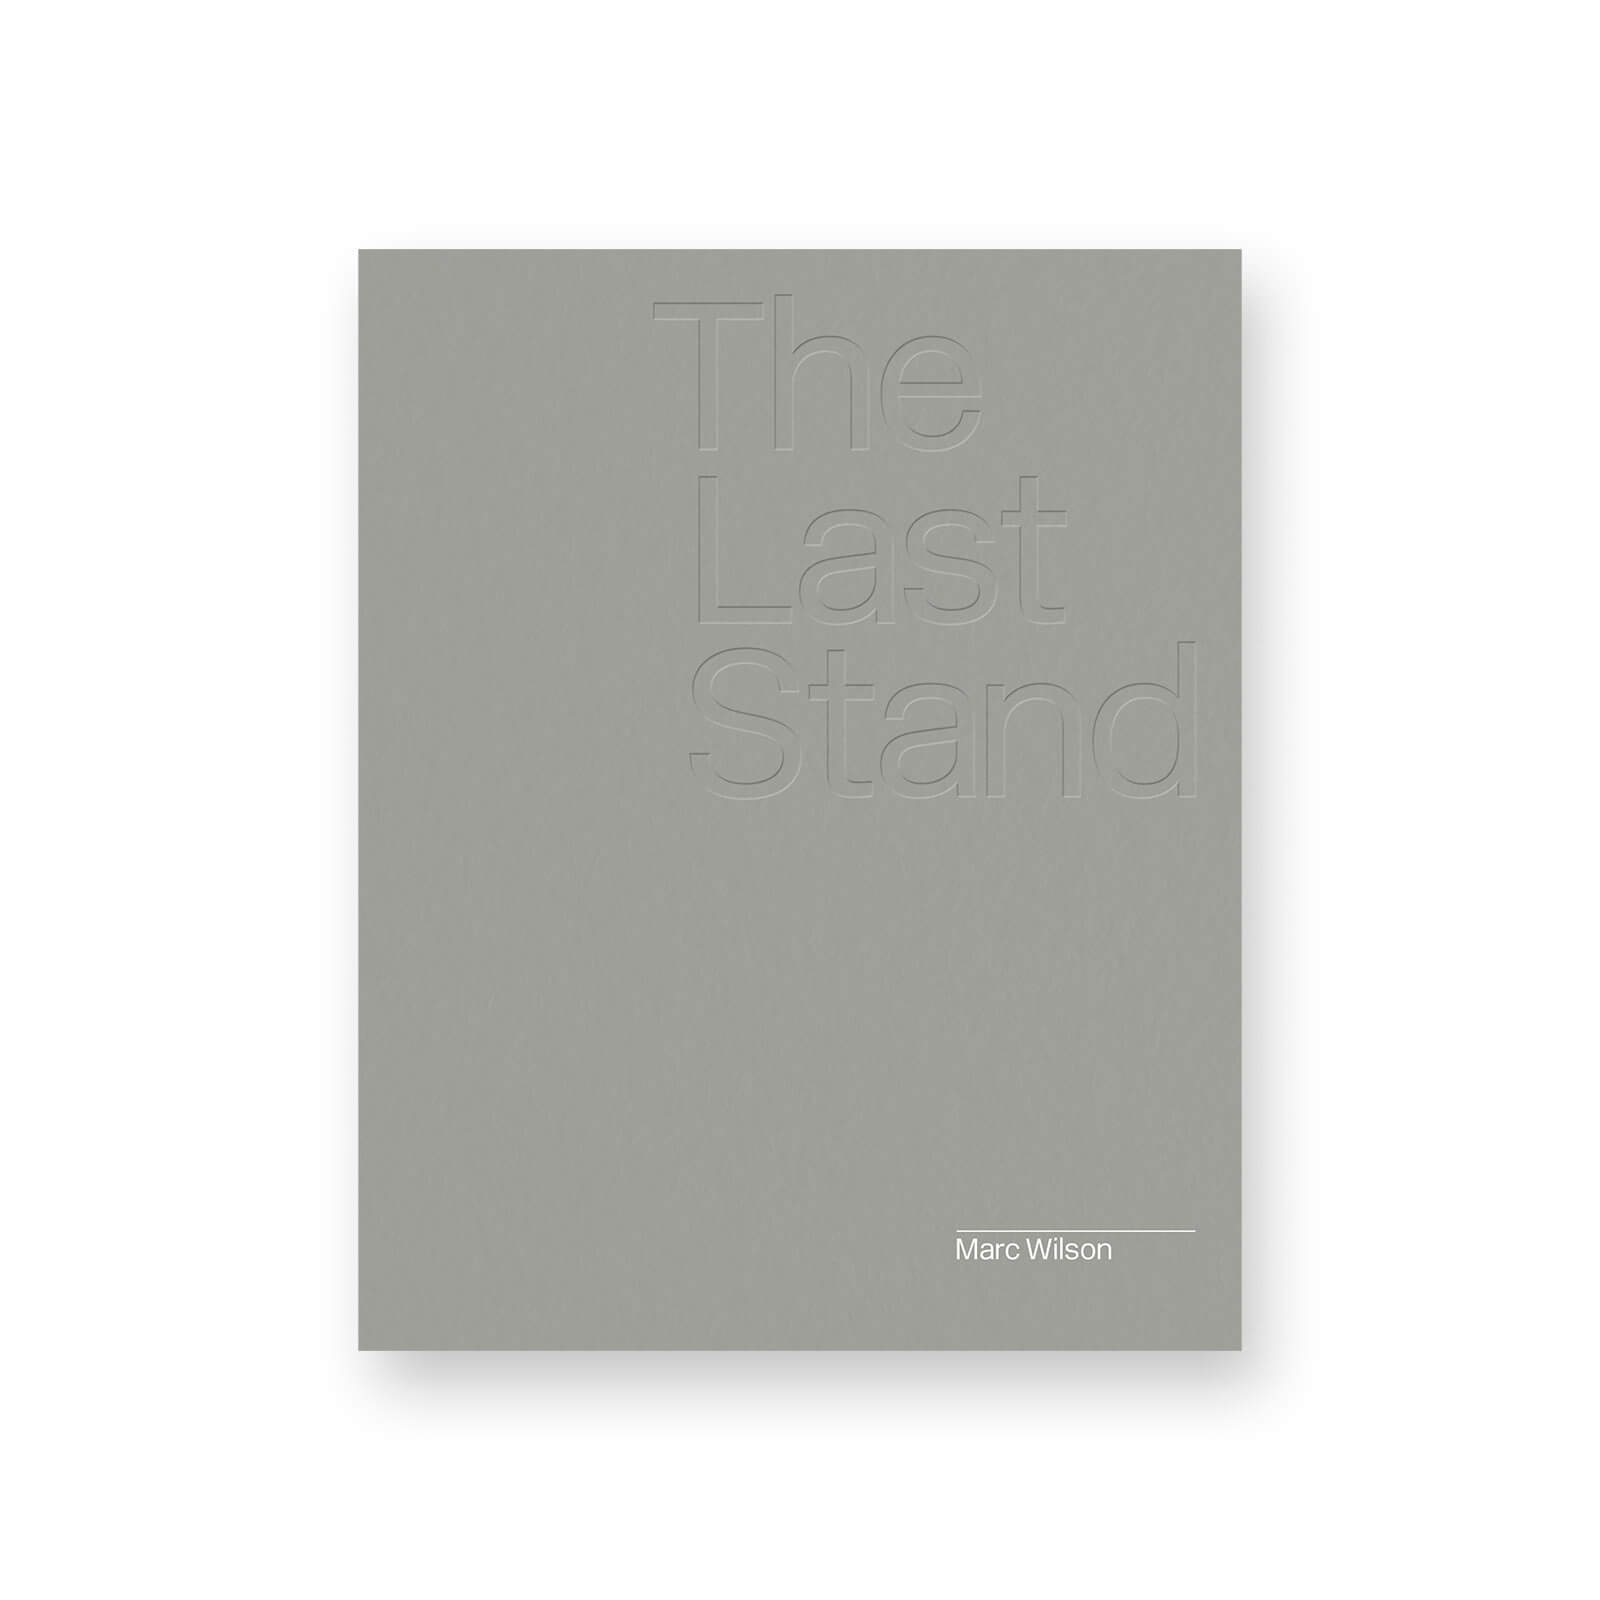 Marc Wilson the last stand, the south west collective of photography ltd